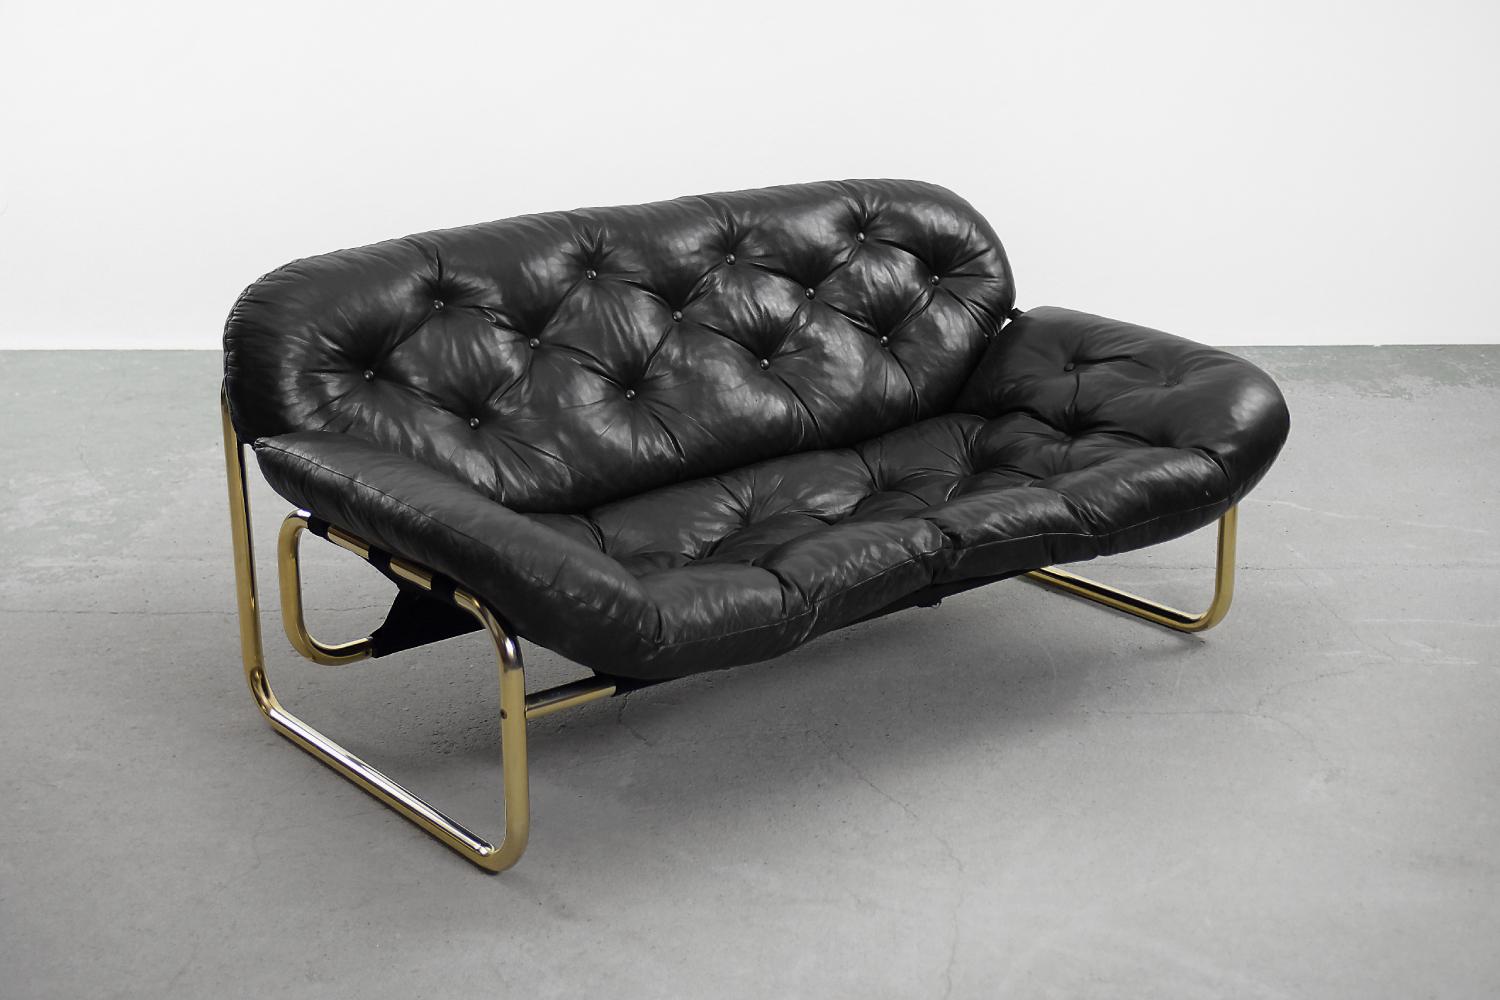 This elegant, quilted sofa designed by John-Bertil Häggström for the Swedish manufacture Swed-Form, Skillingaryd during the 1970s. The sofa is upholstered in black natural leather with even quilting. The seat and backrest are separate elements and